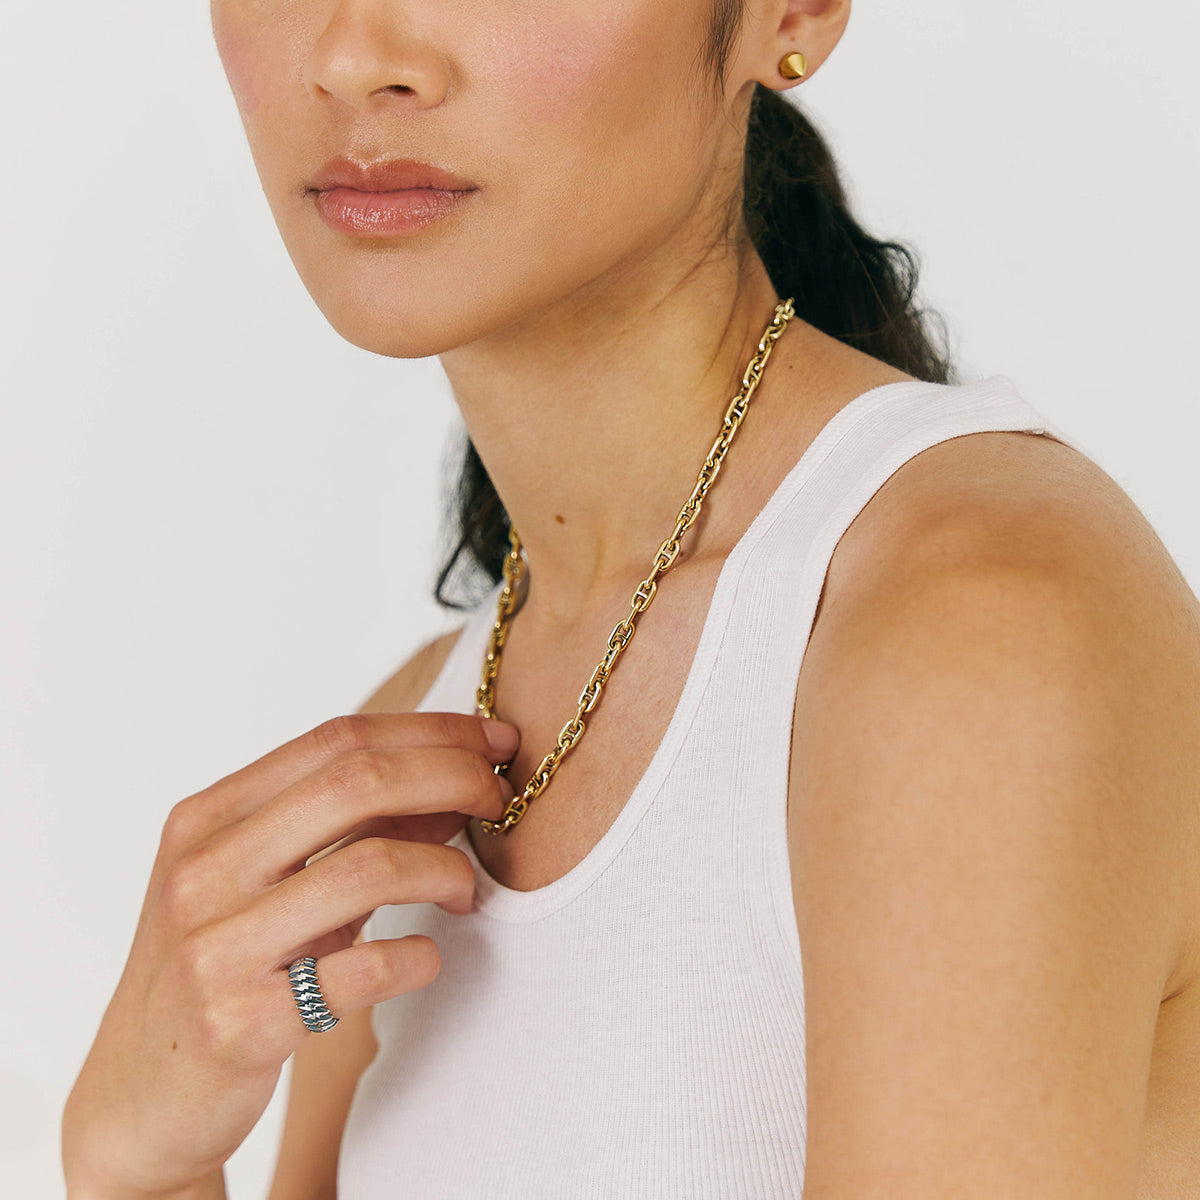 Model 22 Necklace | 18K Yellow Gold - 3A